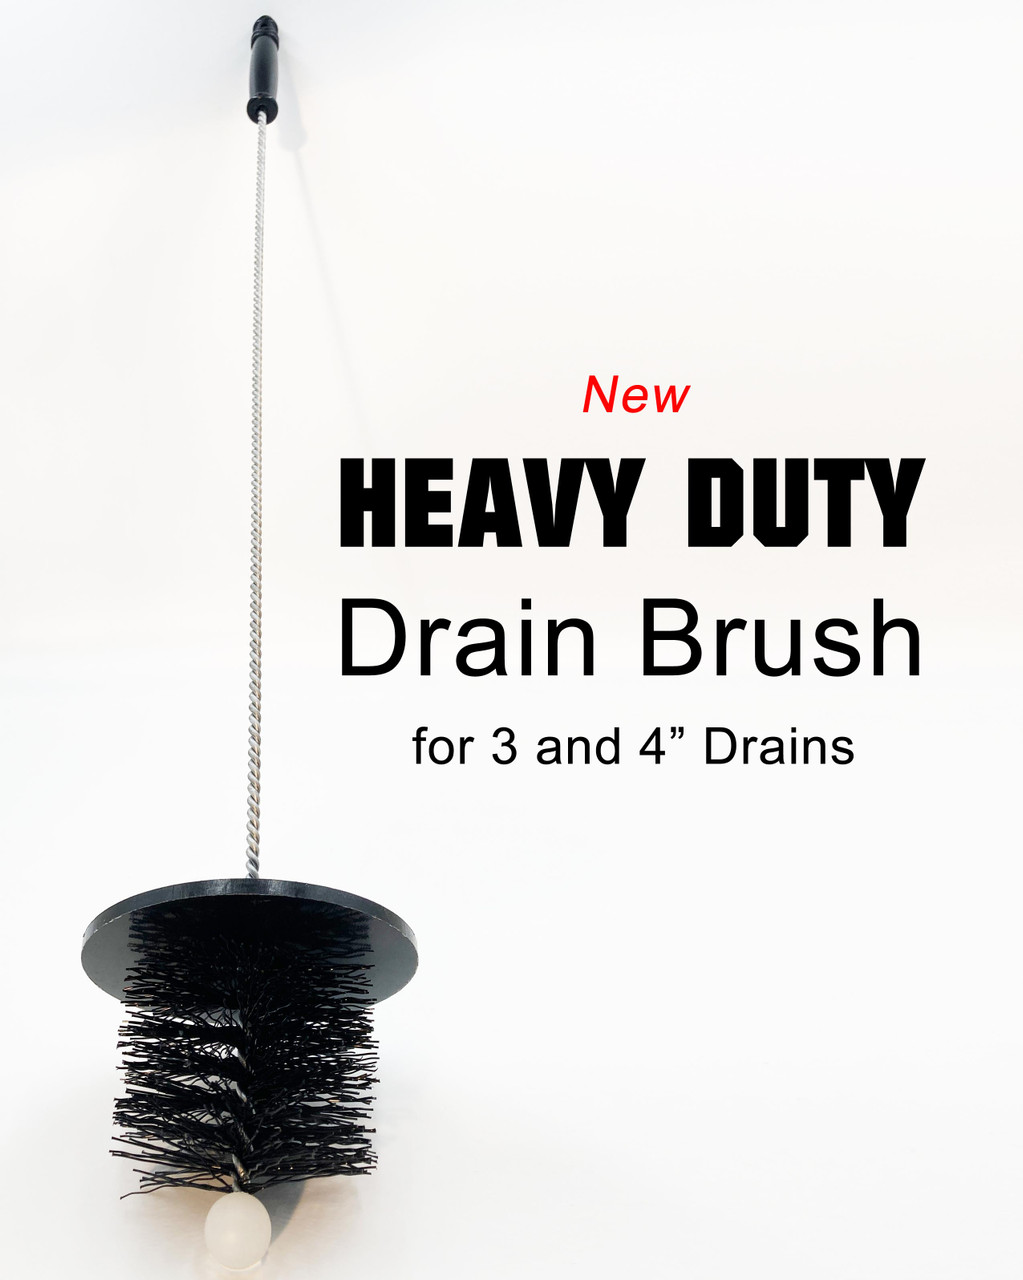 Heavy Duty Drain Brush for cleaning commercial drains